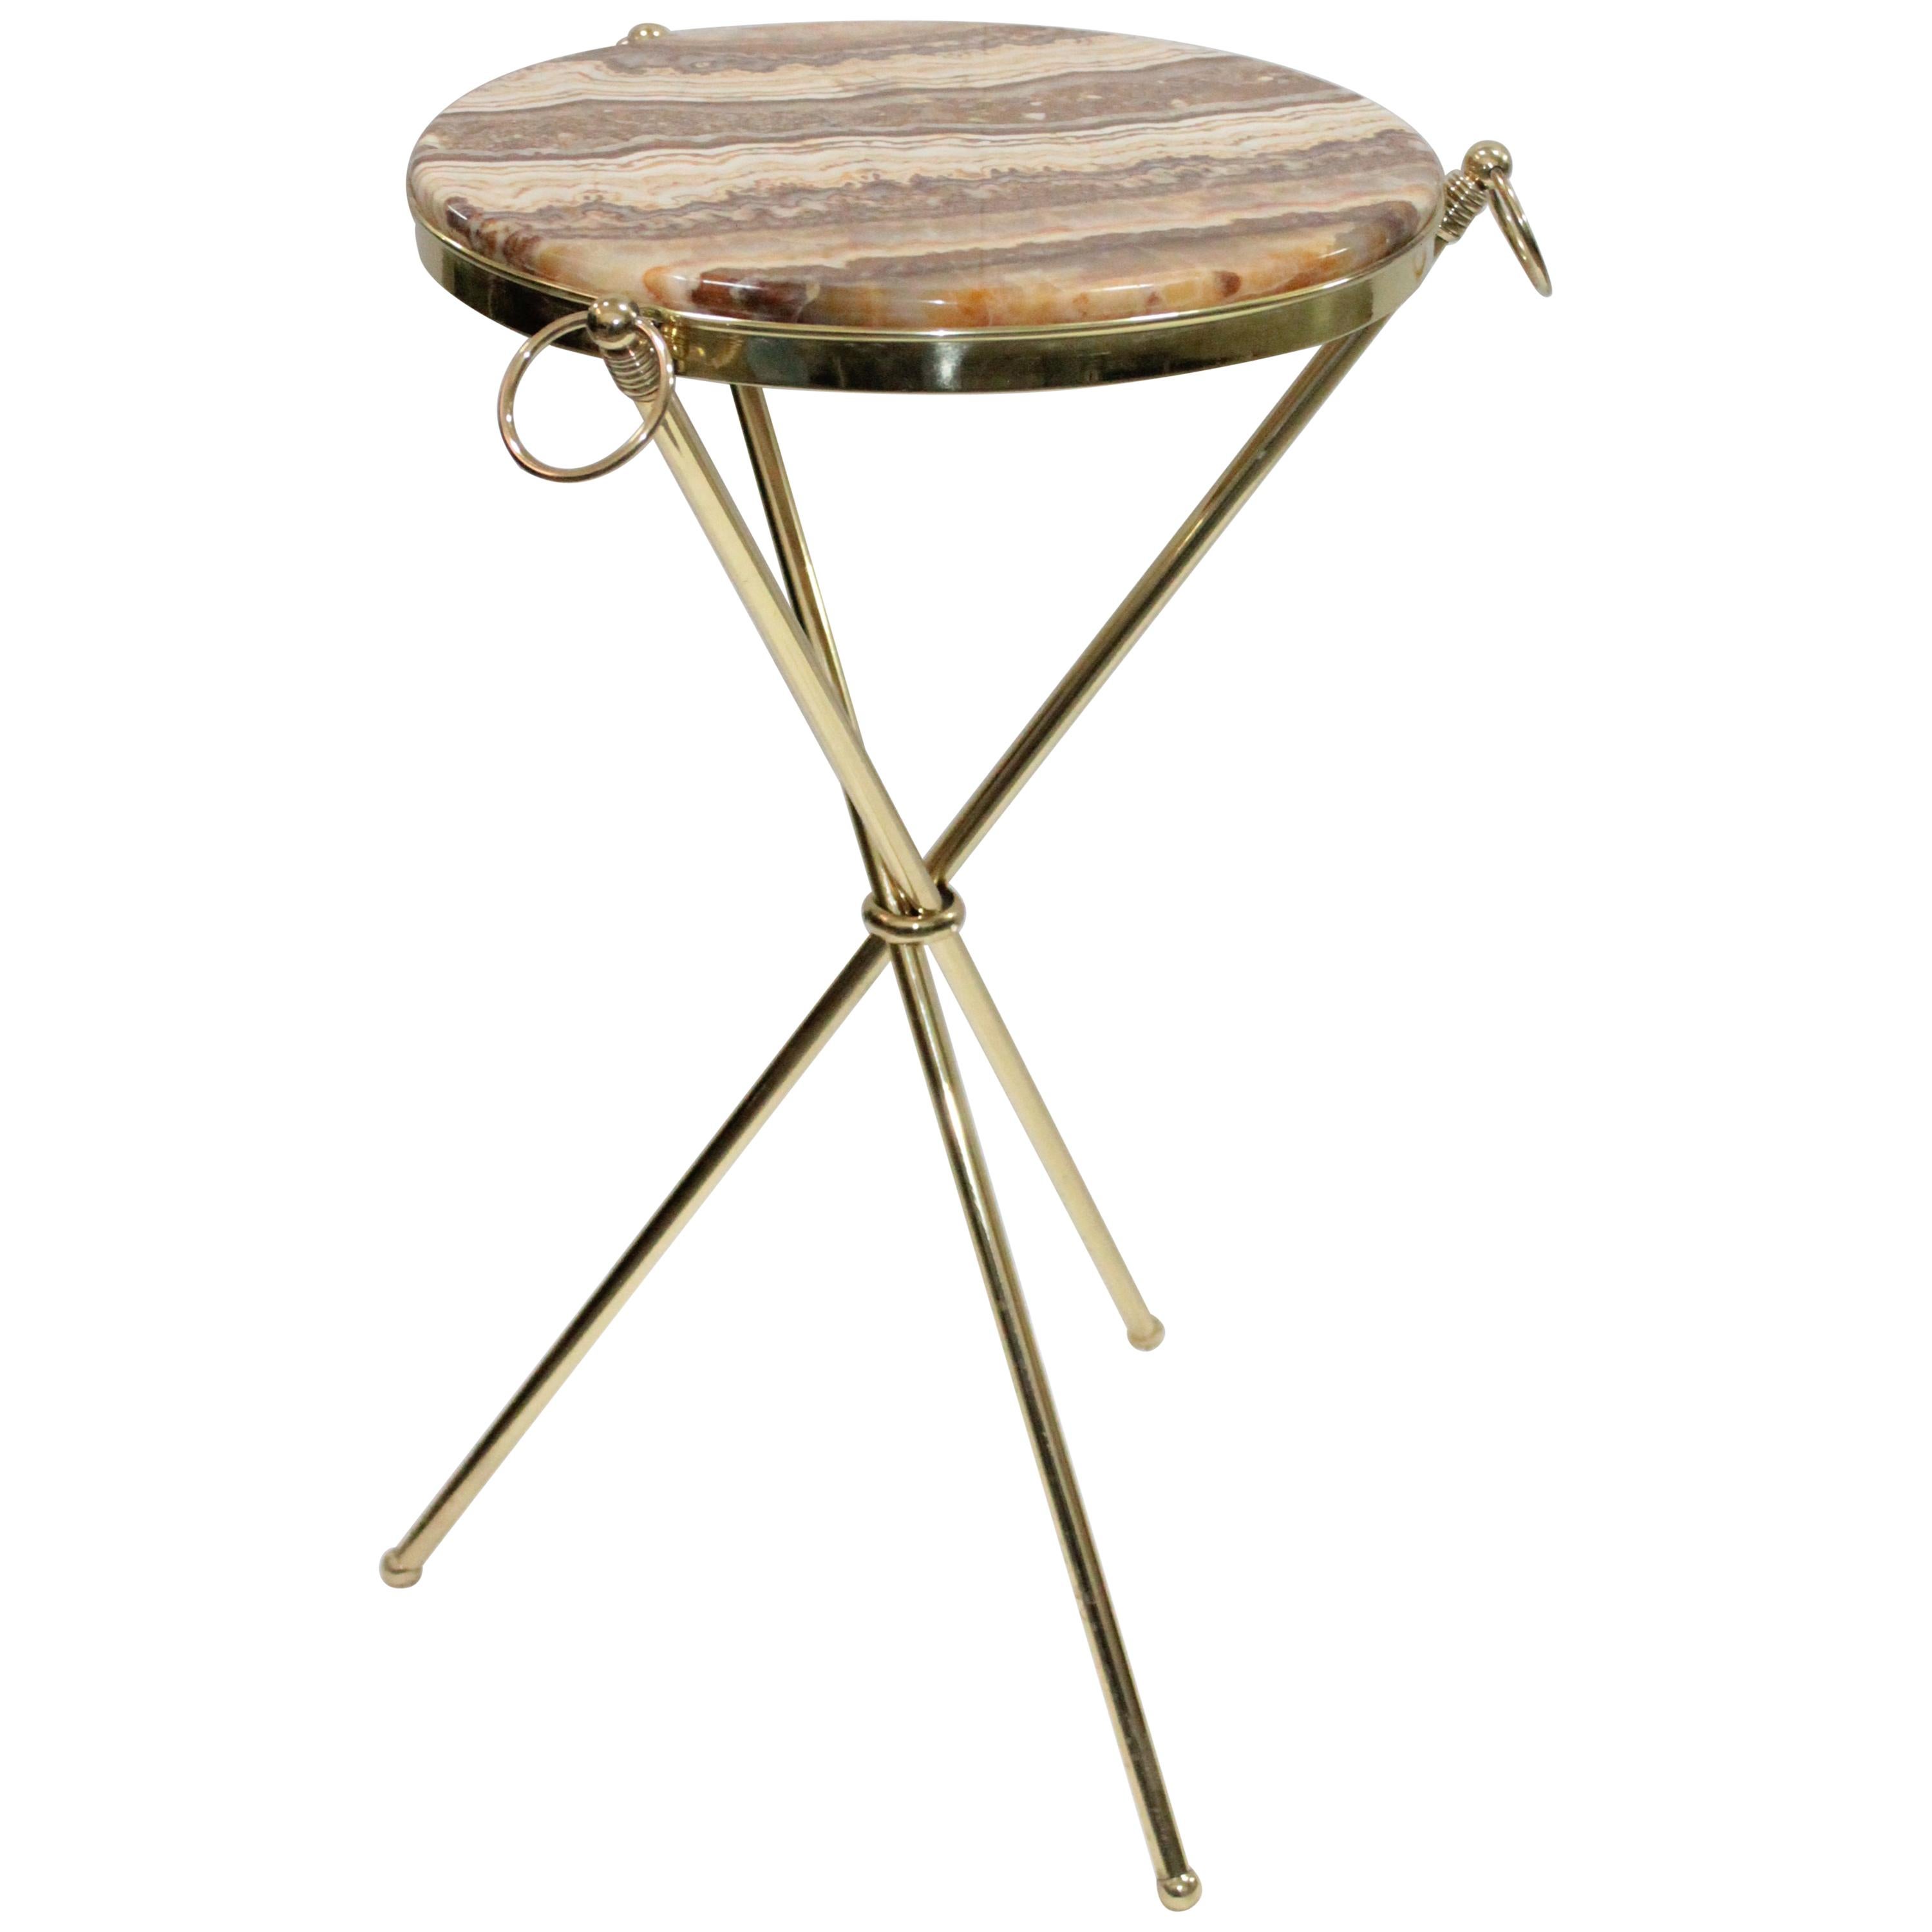 Midcentury Italian Tripod Round Side Table 1950s Brass and Onyx Marble